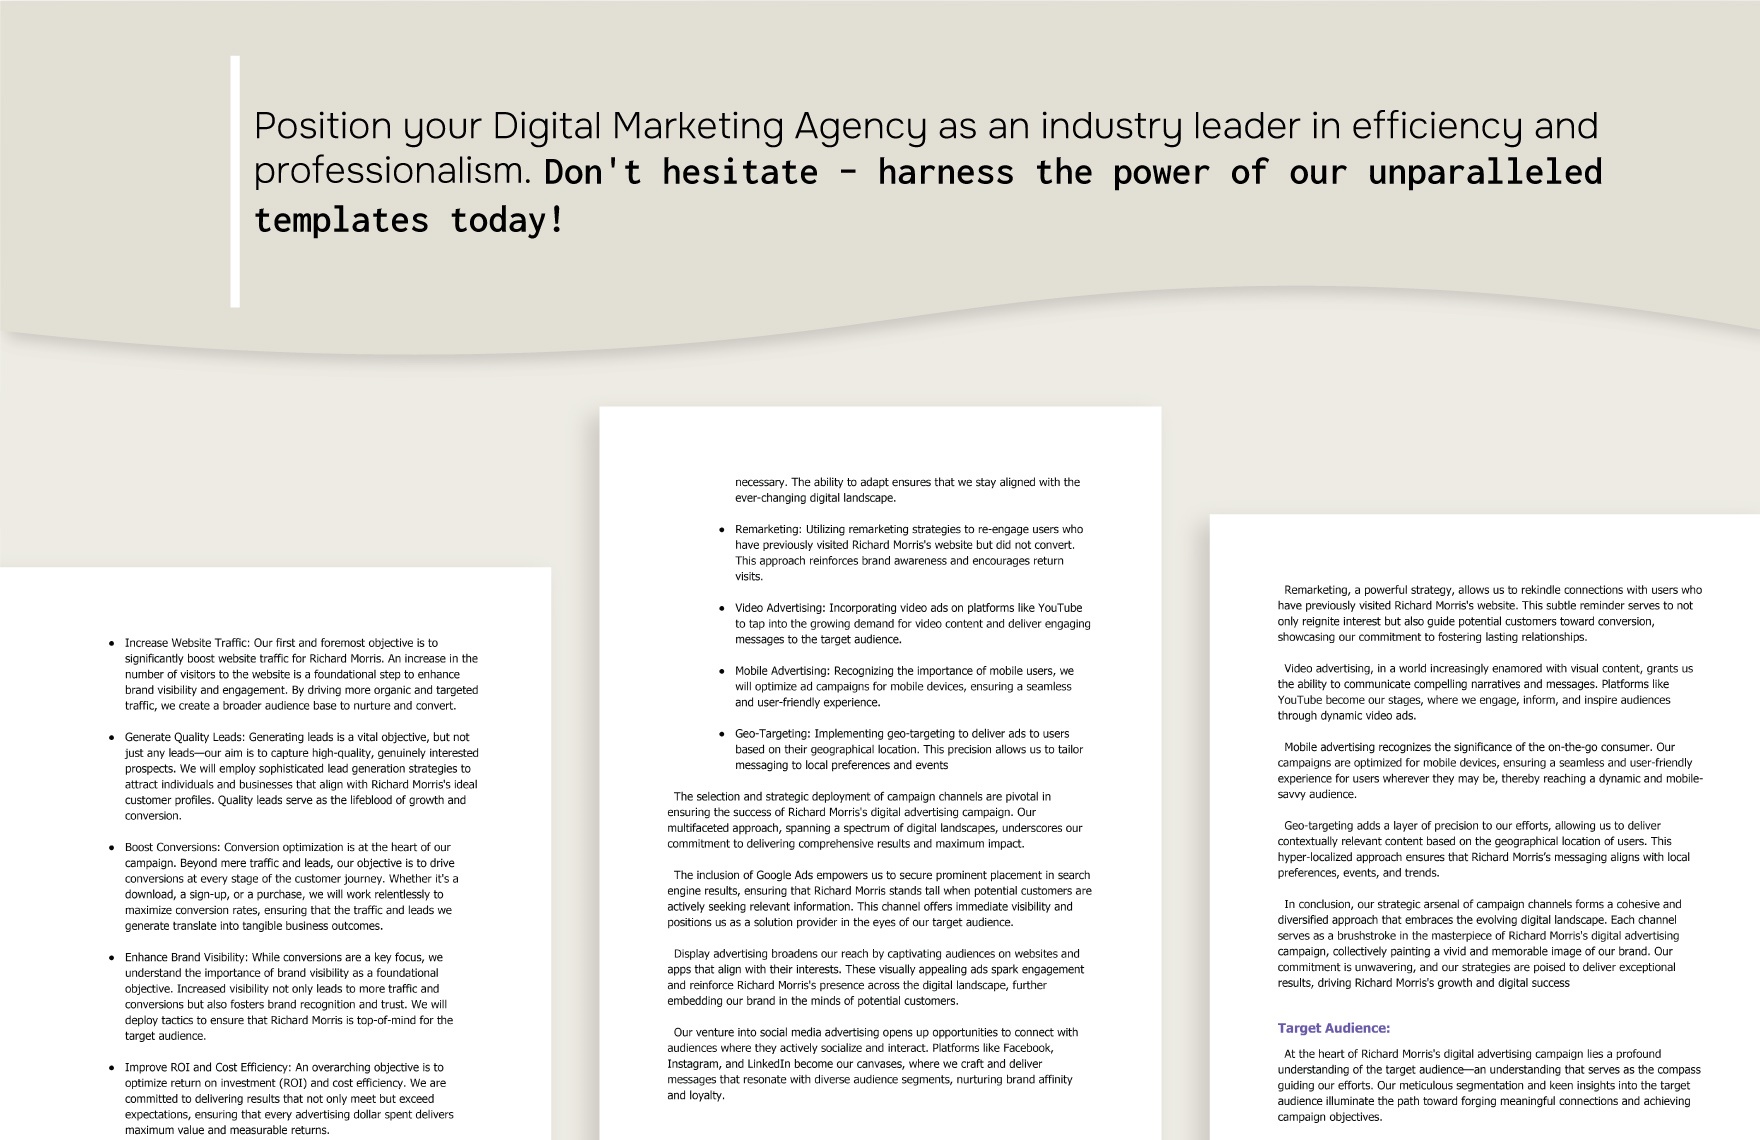 Digital Marketing Agency Paid Advertising Campaign Plan Template